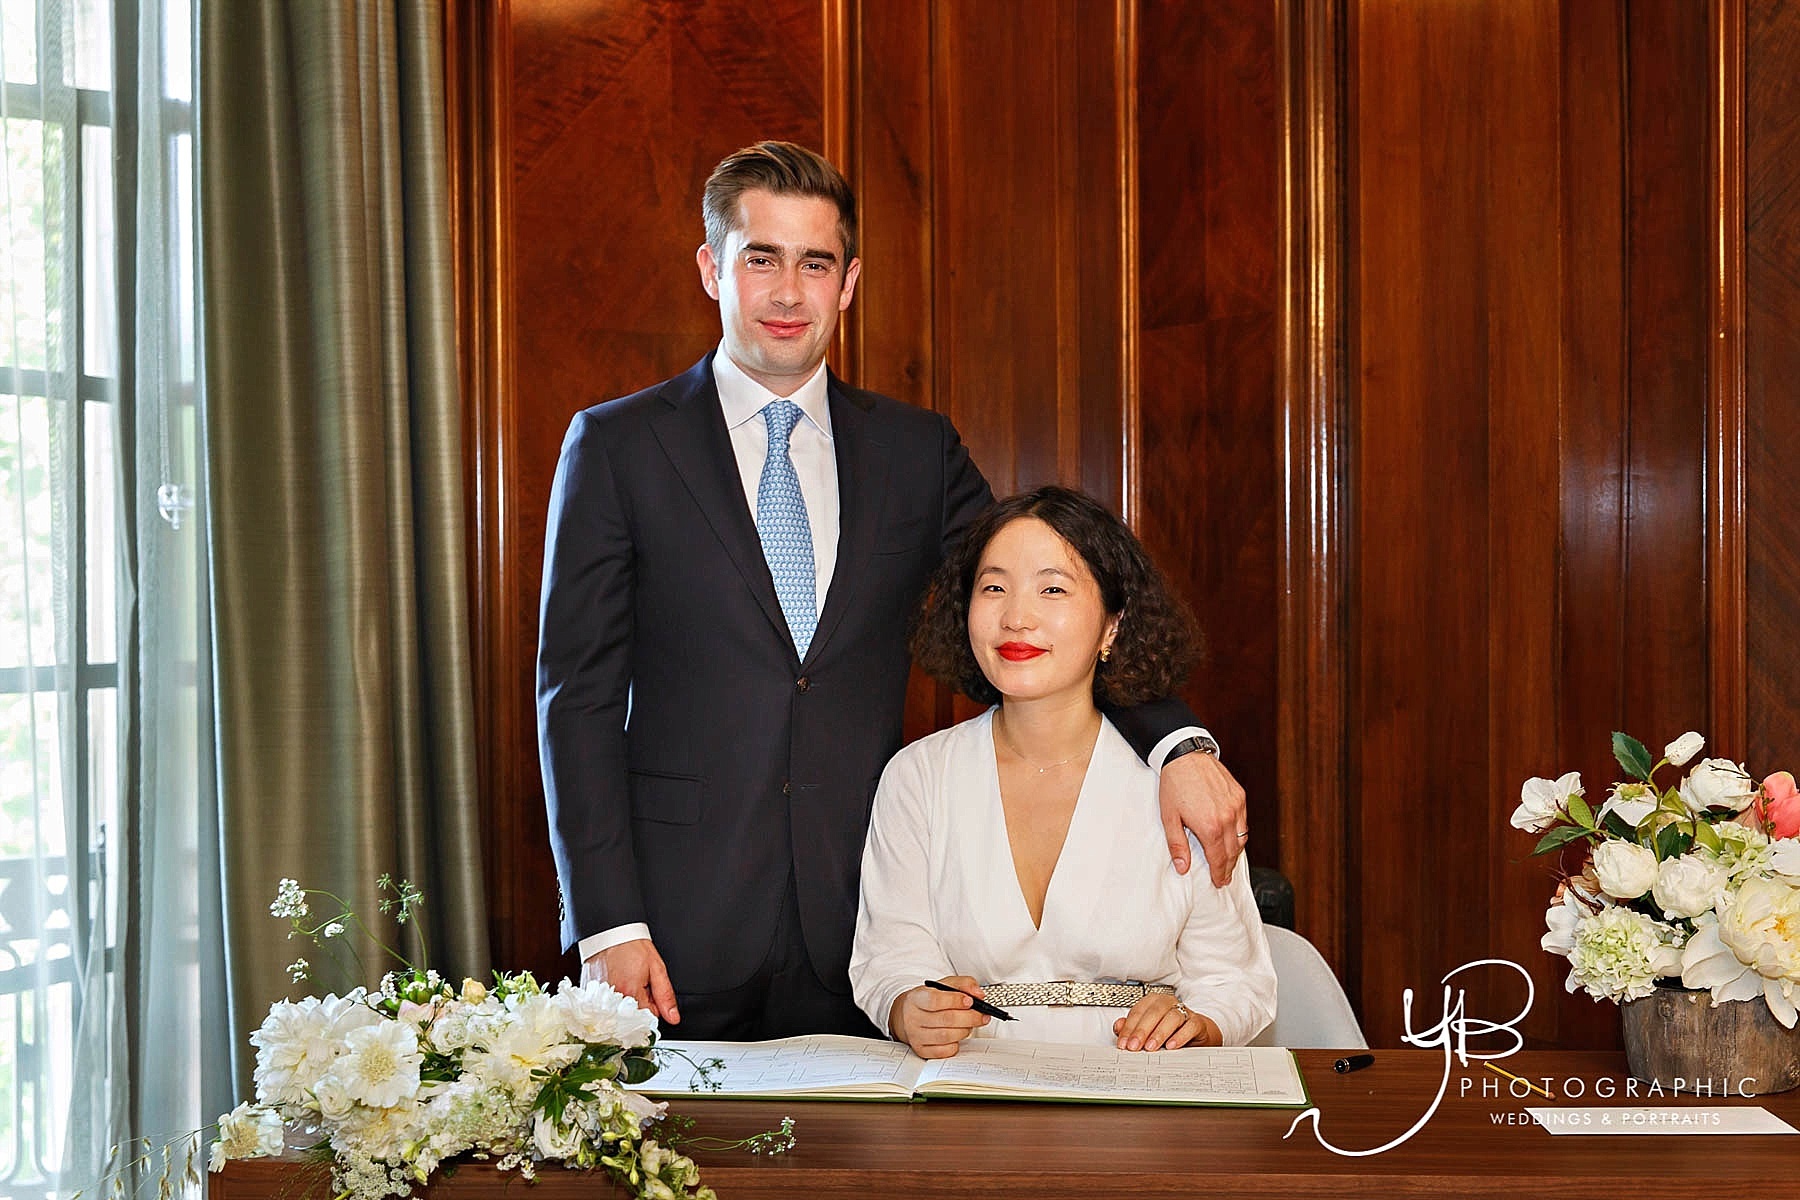 The bride and groom Janie and Jonathan pose for a formal wedding photo after signing the register in Westminster's Marylebone Room. 